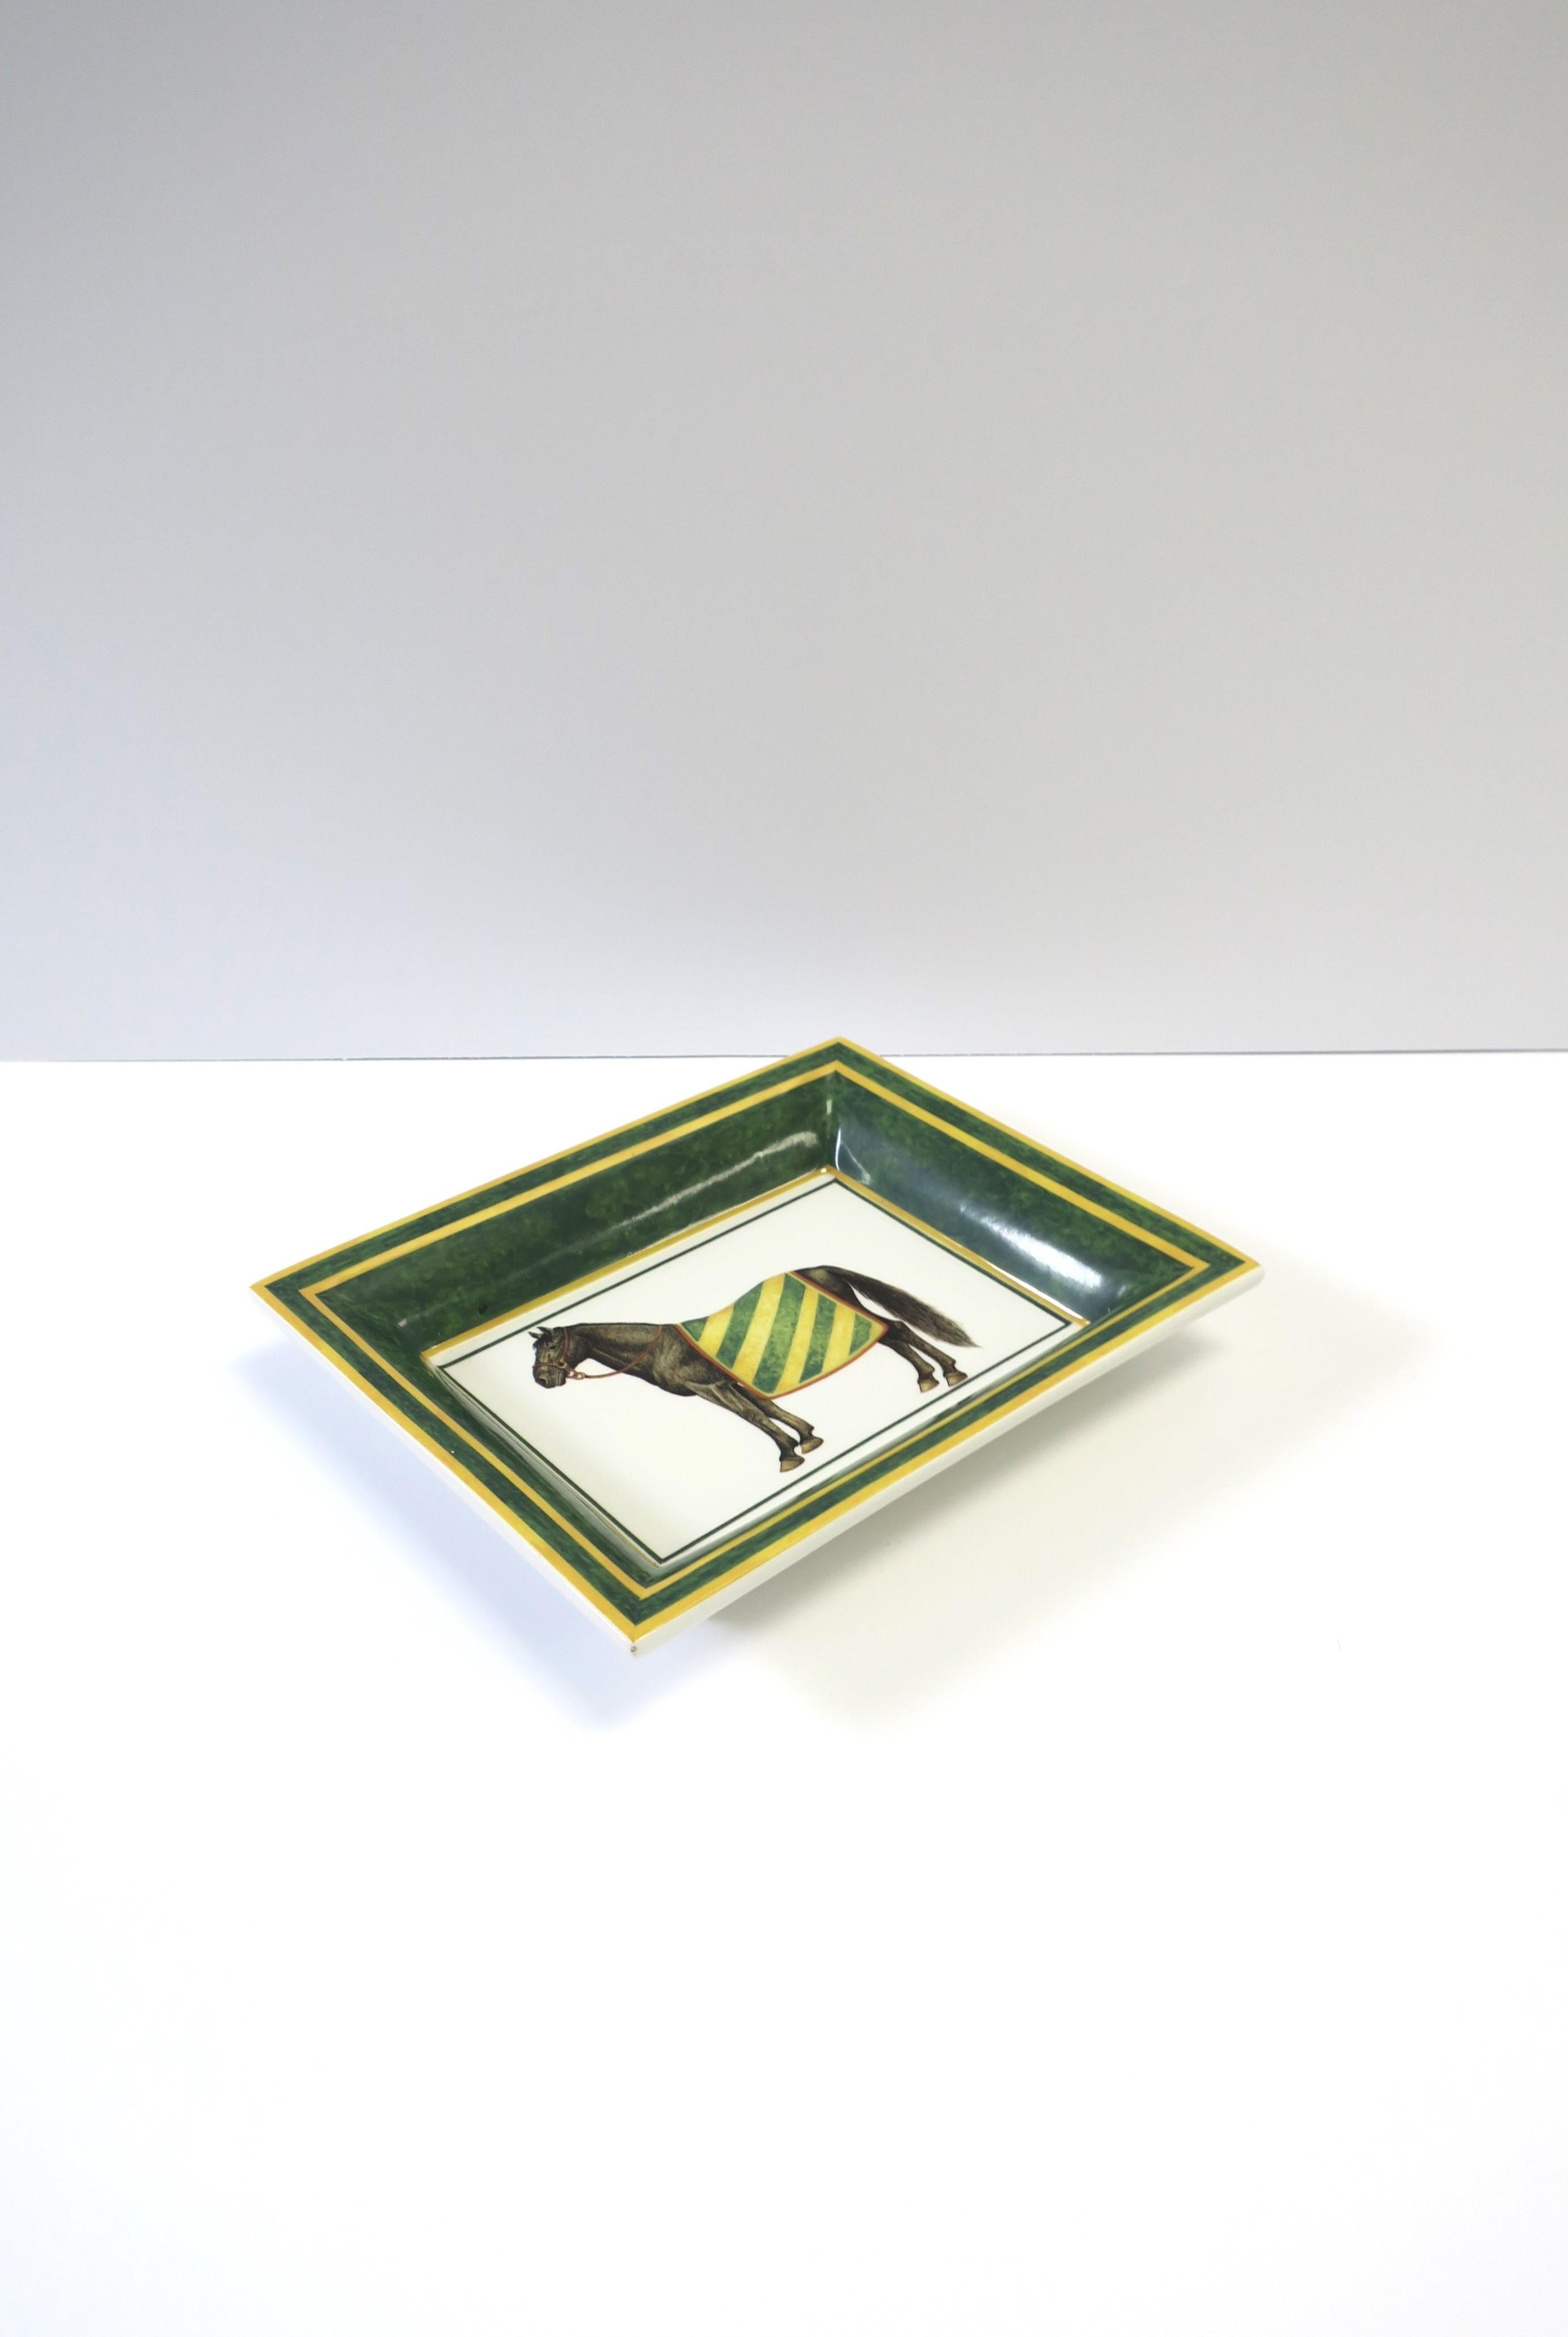 Italian Porcelain Jewelry Tray Dish Vide-Poche Catchall with Horse Design For Sale 4